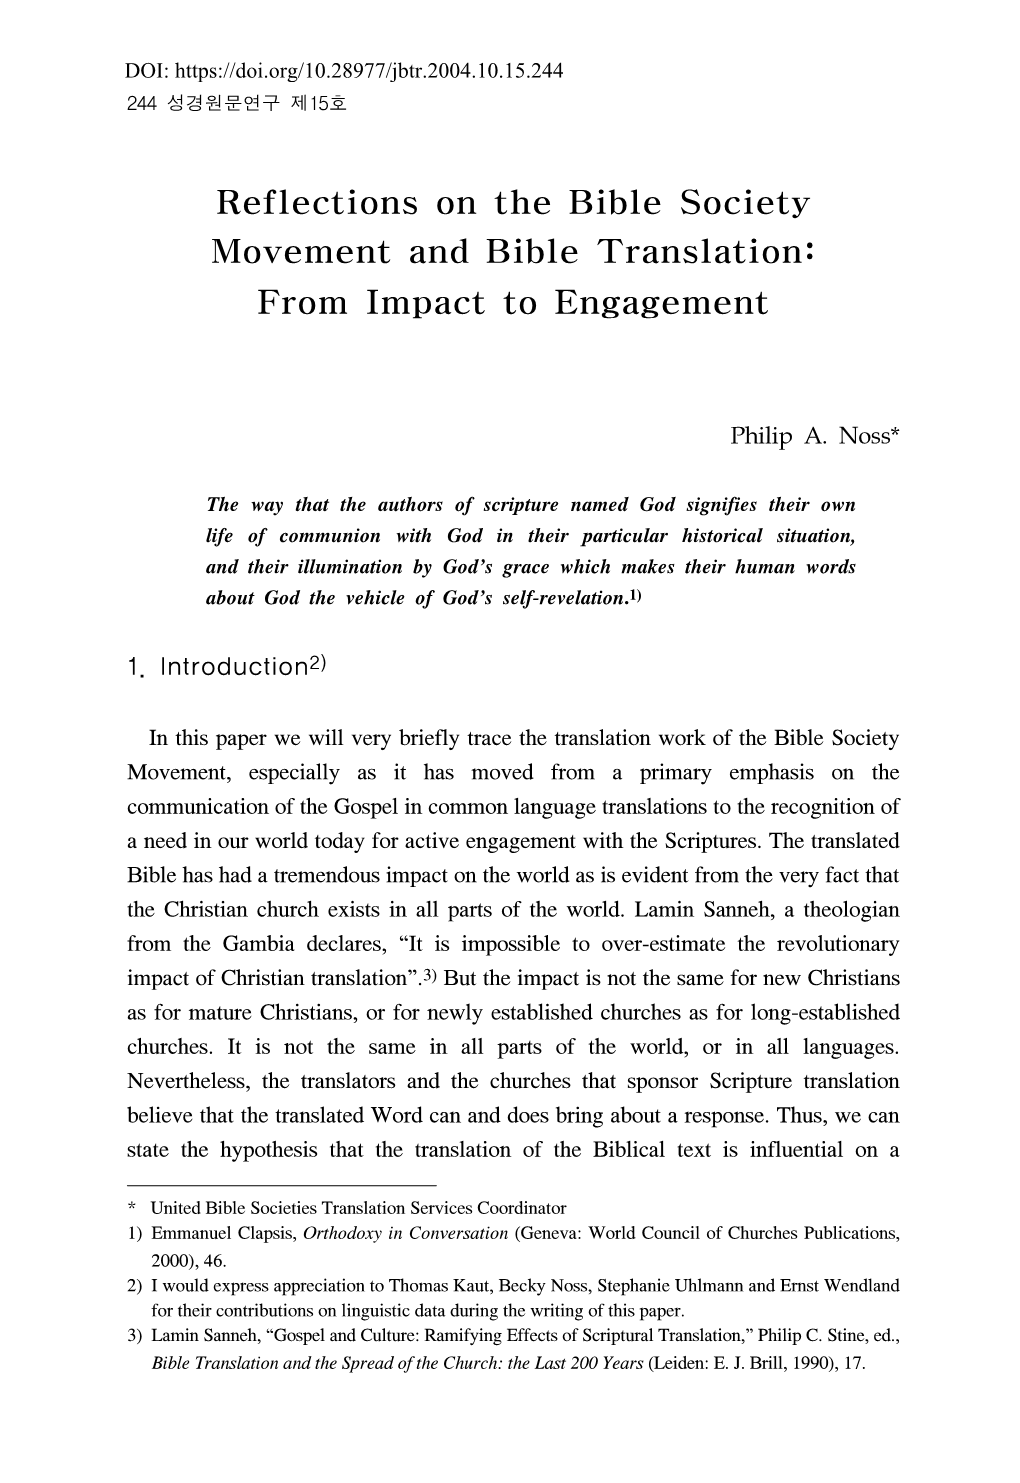 Reflections on the Bible Society Movement and Bible Translation: from Impact to Engagement